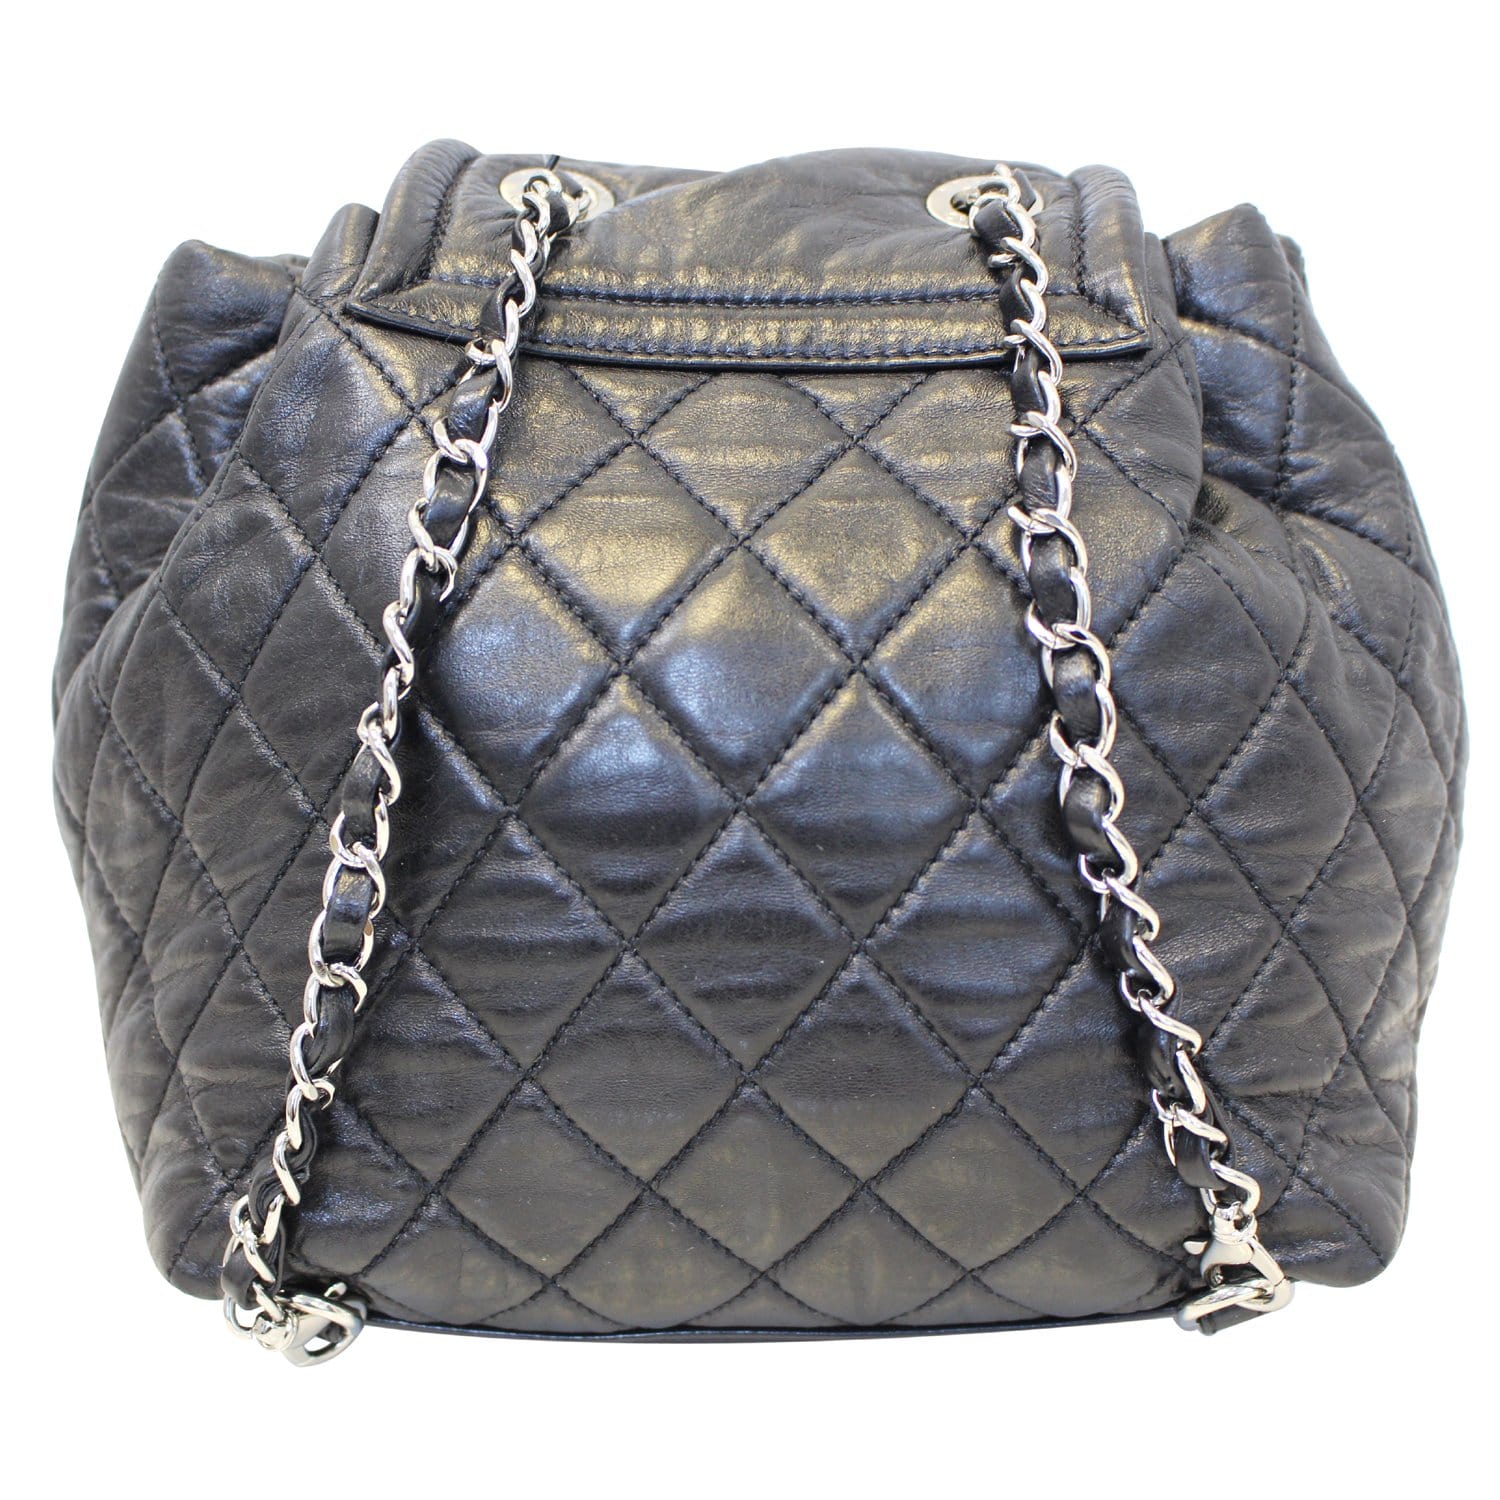 CHANEL Beijing 2 in 1 Black Quilted Leather Backpack Bag-US